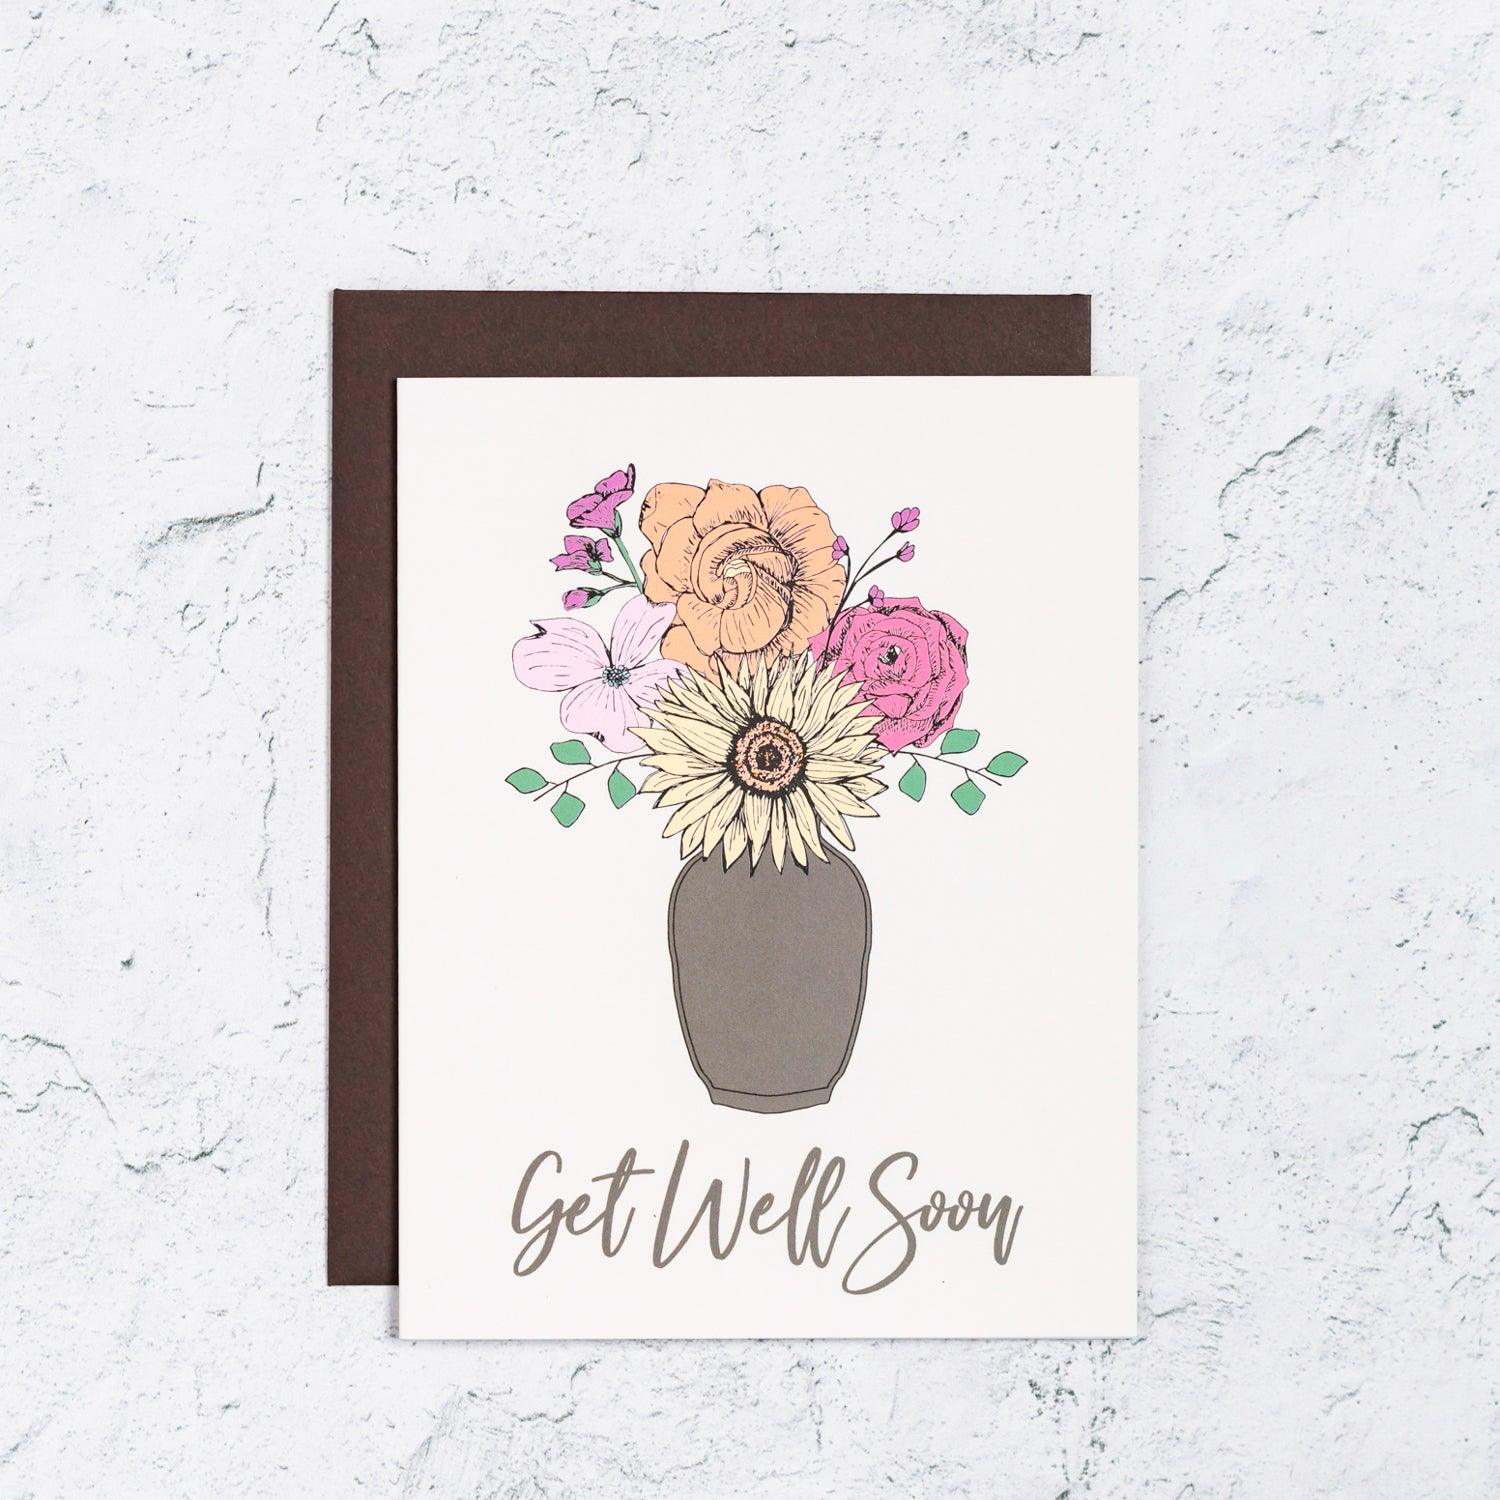 Get Well Soon Card With Flowers in Vase